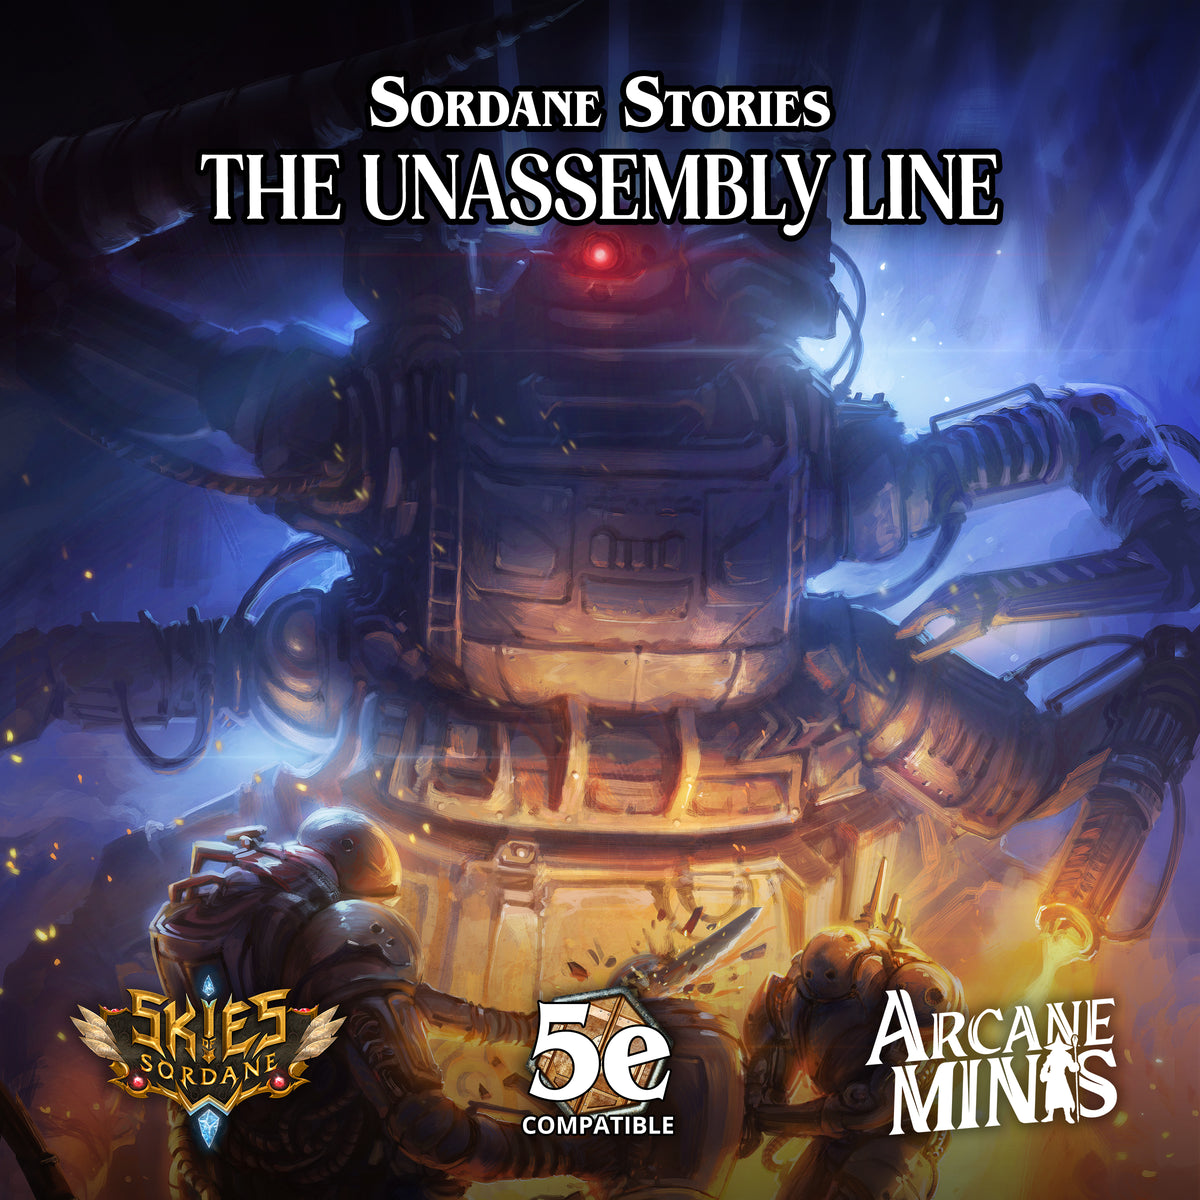 The Unassembly Line - A Sordane Stories 5e Adventure